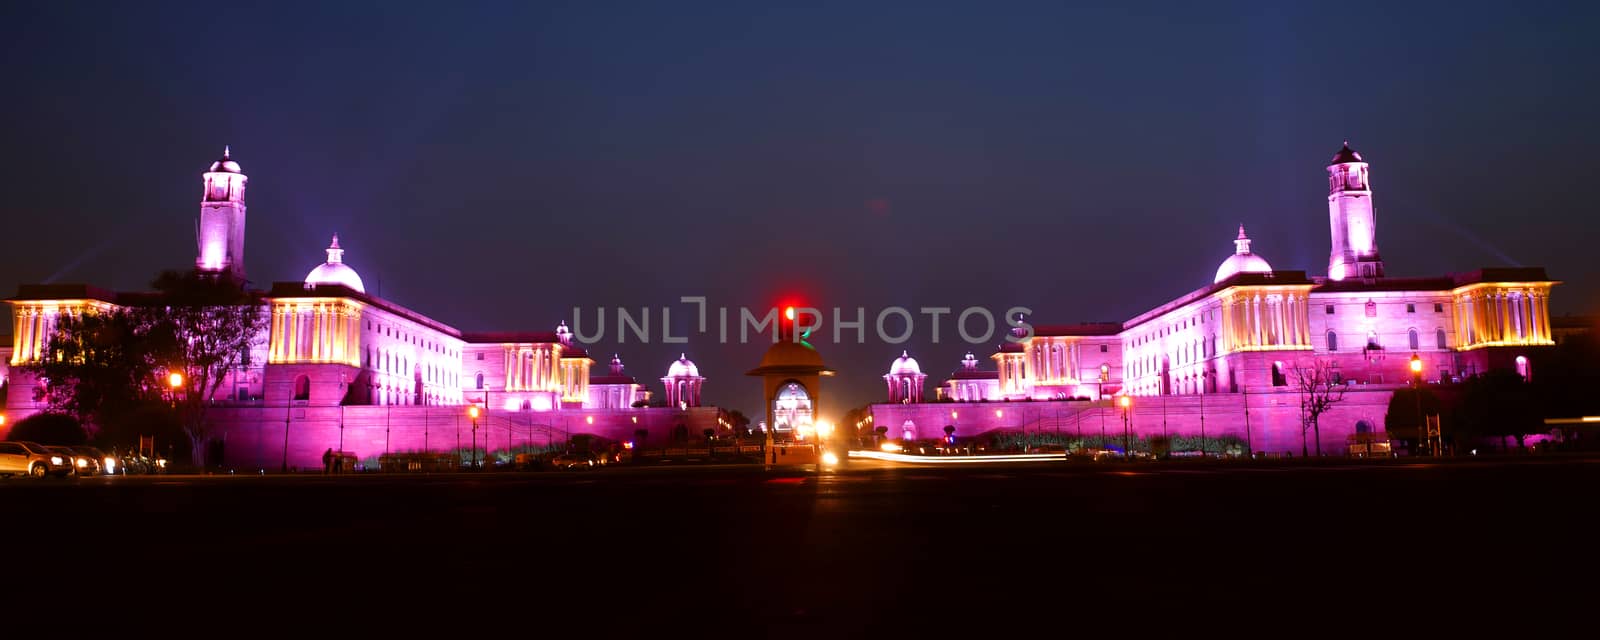 NEW DELHI, INDIA - April 26: Rashtrapati Bhavan is the official home of the President of India on April 26, 2019, New Delhi, India. by kumar3332